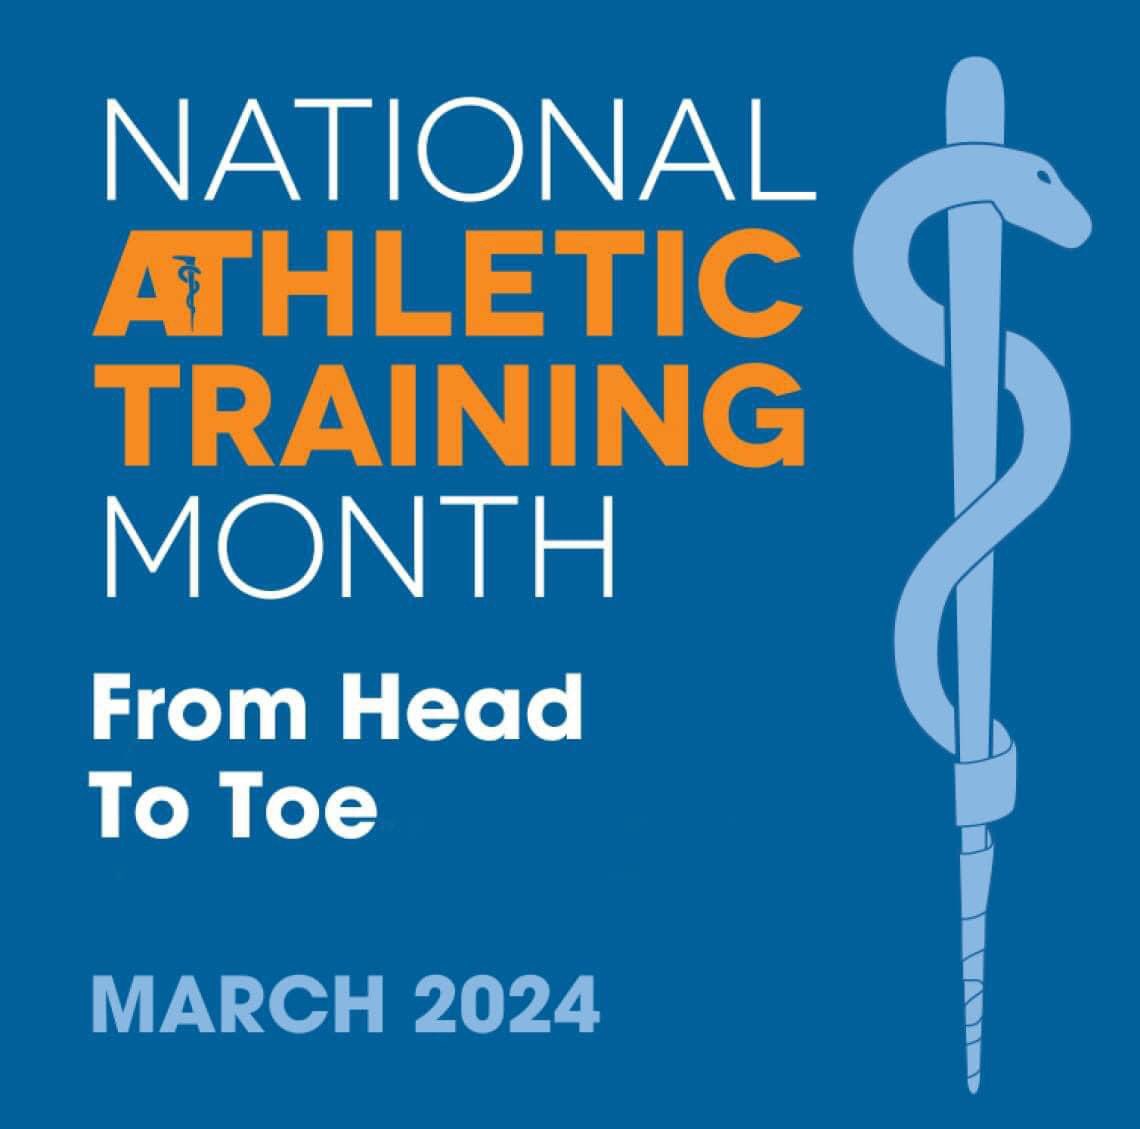 Happy National Athletic Training Month to all my fellow ATC’s👊🏼👊🏼👊🏼